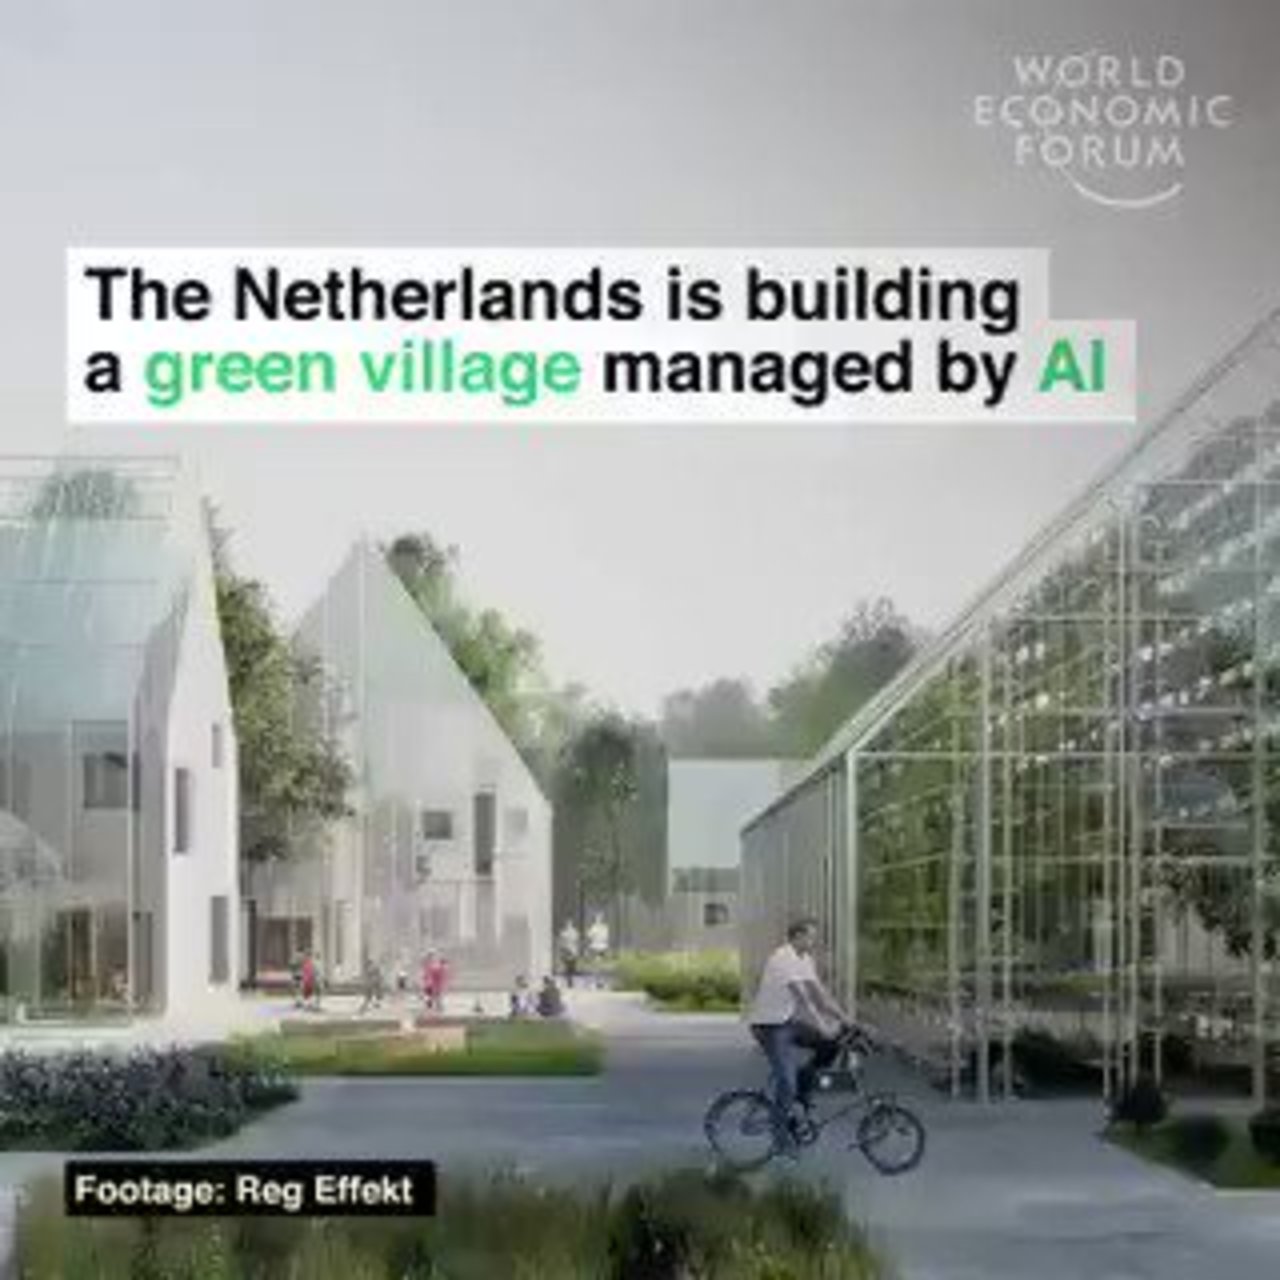 The Netherlands is building a Green Village managed by #AI by @wef #ArtificialIntelligence #IoT #SmartCity #DigitalTransformation #Technology #Automation #Innovation Cc: @lucindarhenry1 @willtowntech https://t.co/pRWwUveebY